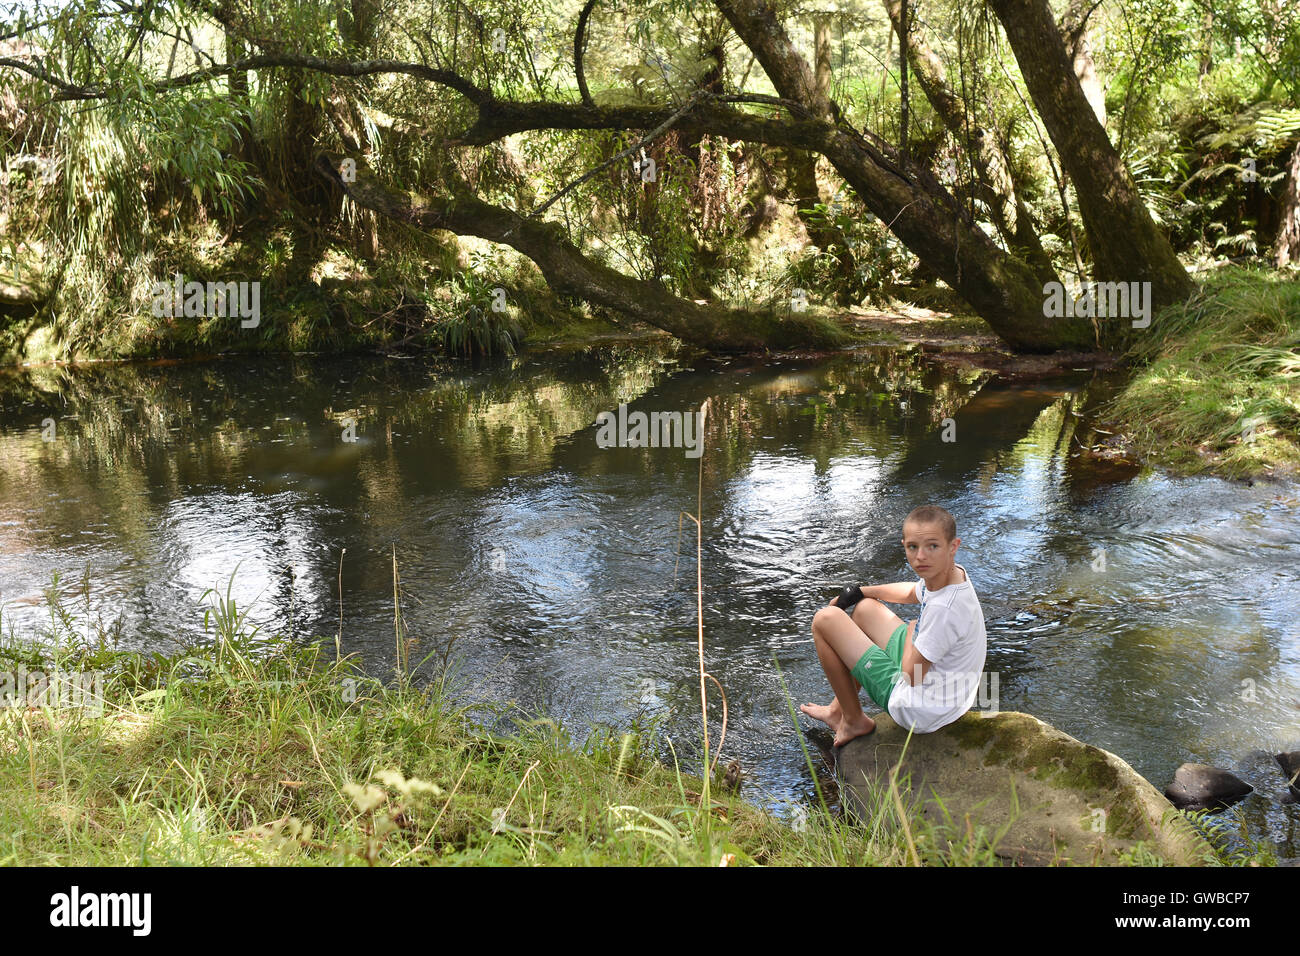 Boy sitting on boulder in small river. Location: Whangarei New Zealand Stock Photo